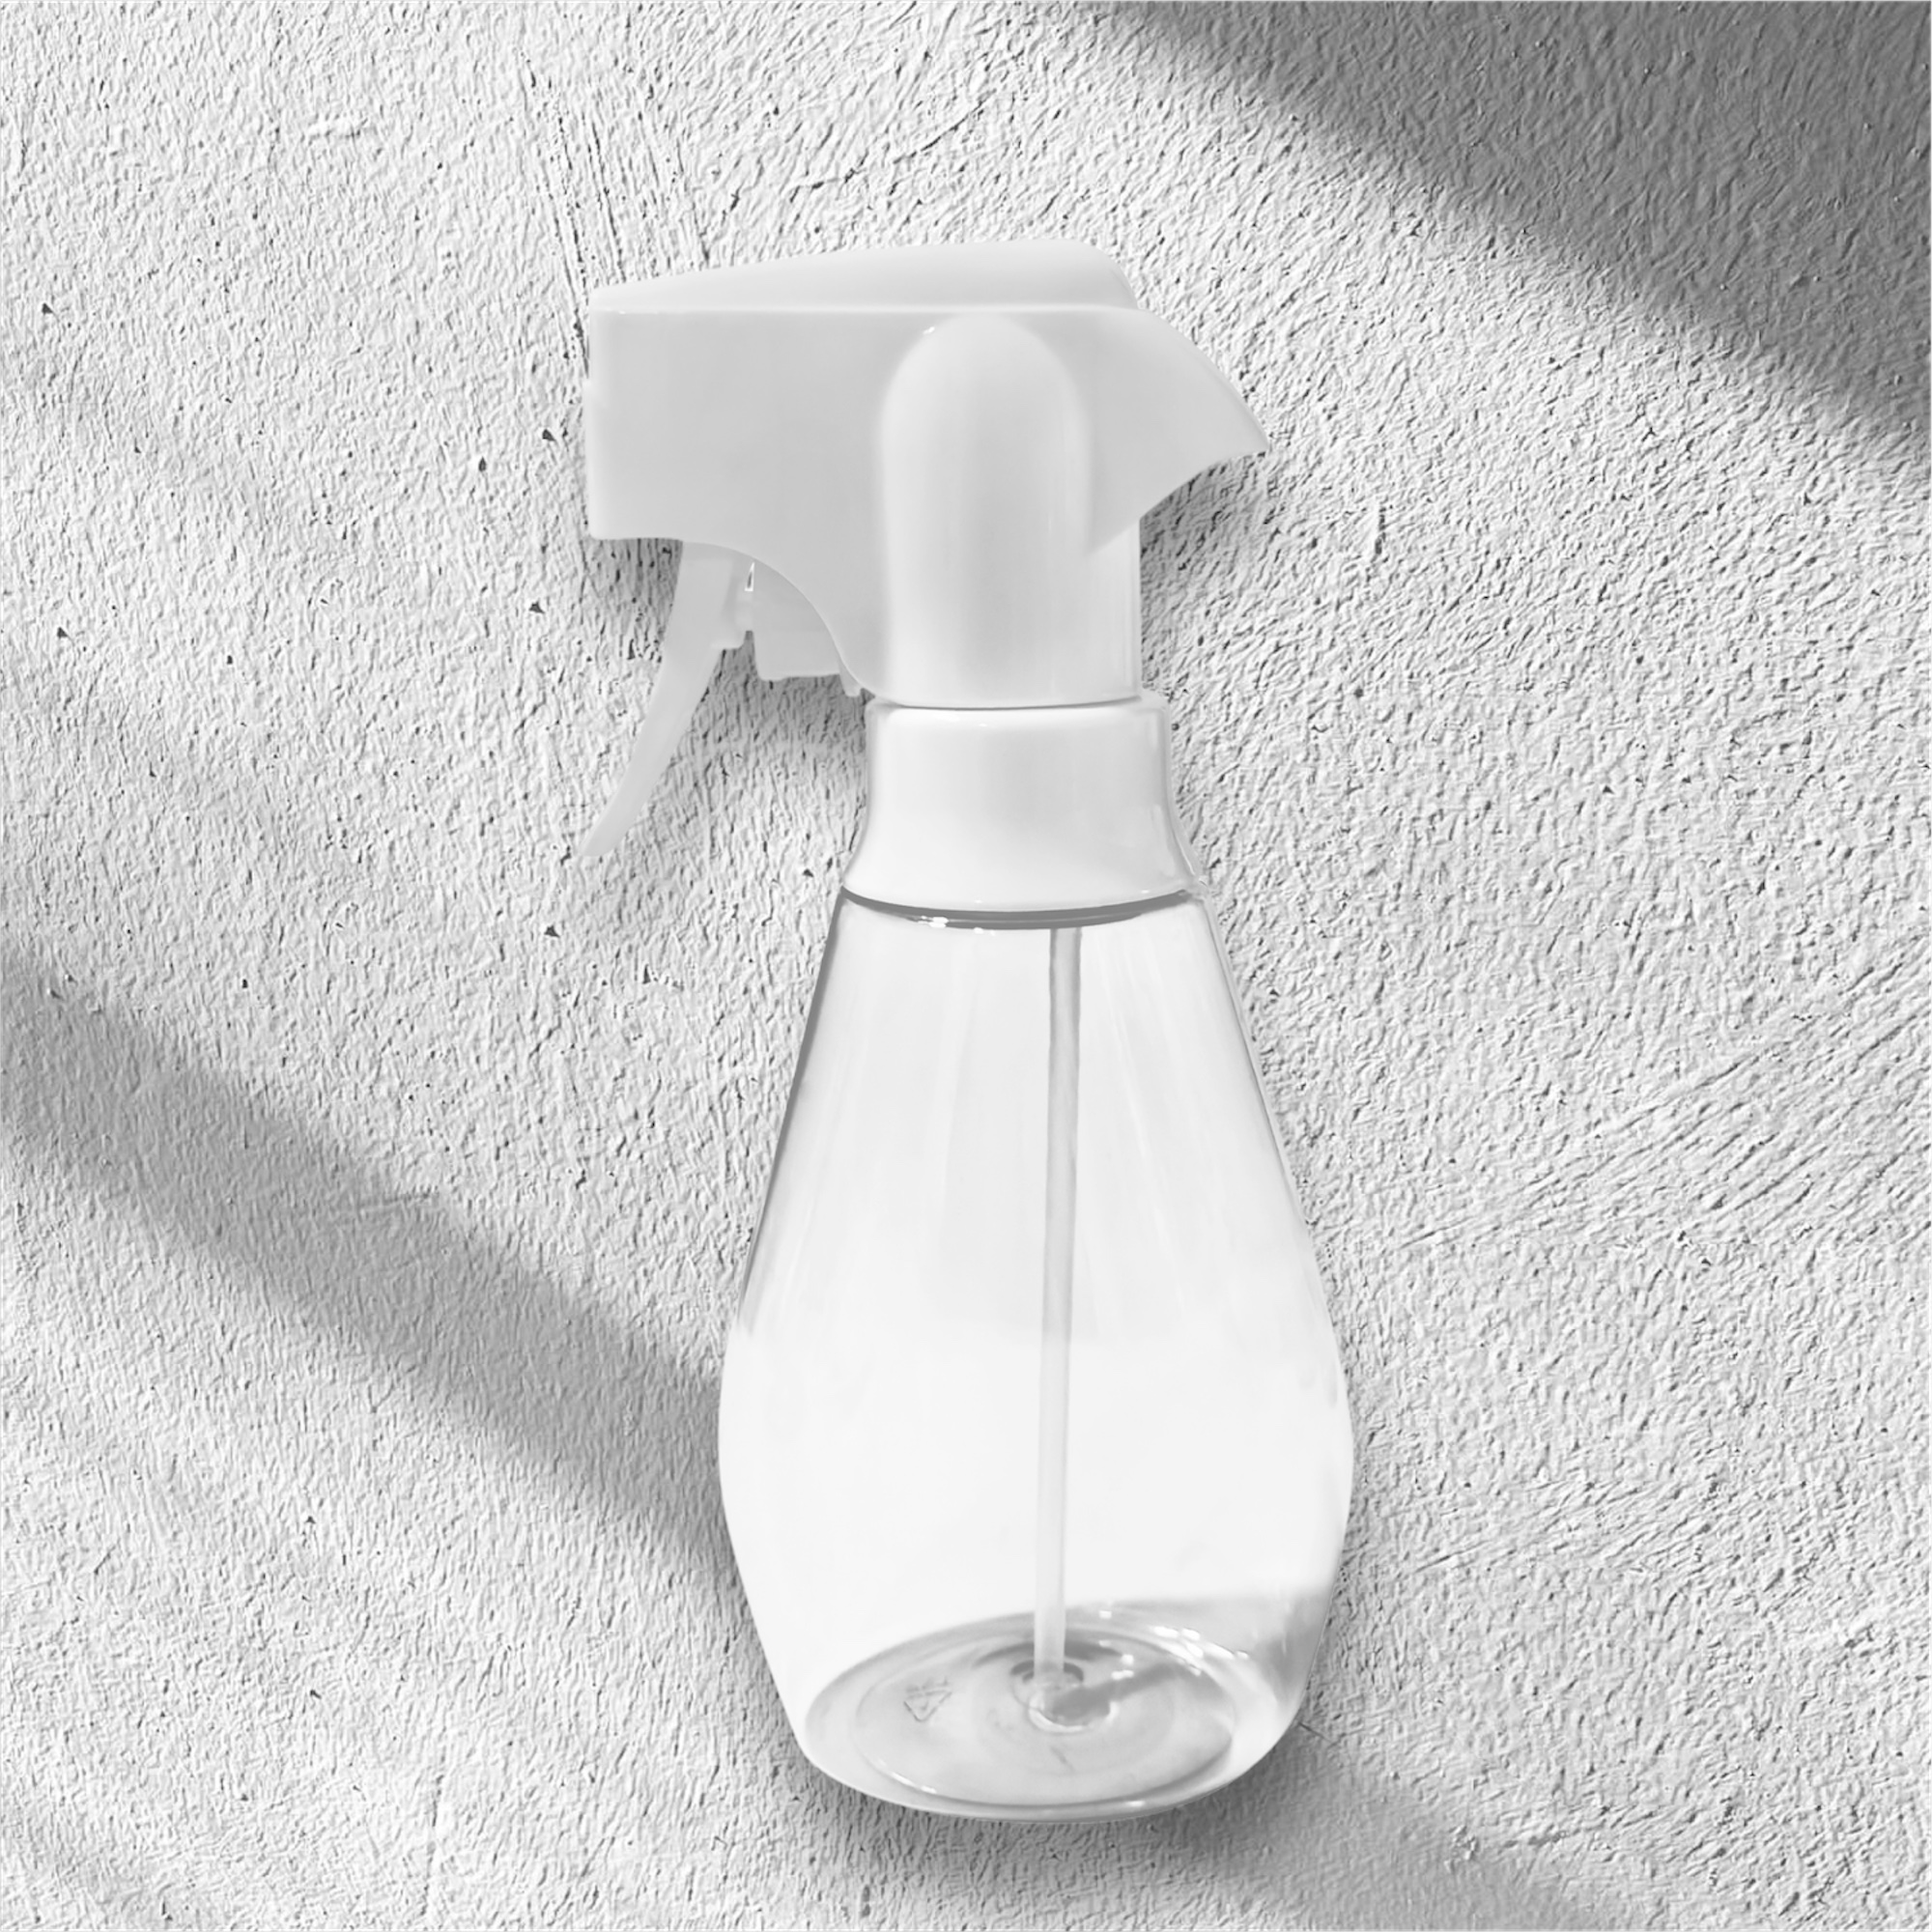 

New Continuous Spray Bottle For Hair (10.1oz/300ml) - Continuous Empty Ultra Fine Plastic Water Mist Sprayer For Hairstyling, Cleaning, Salons, Plants, Essential Oil Scents & More - White 1pc